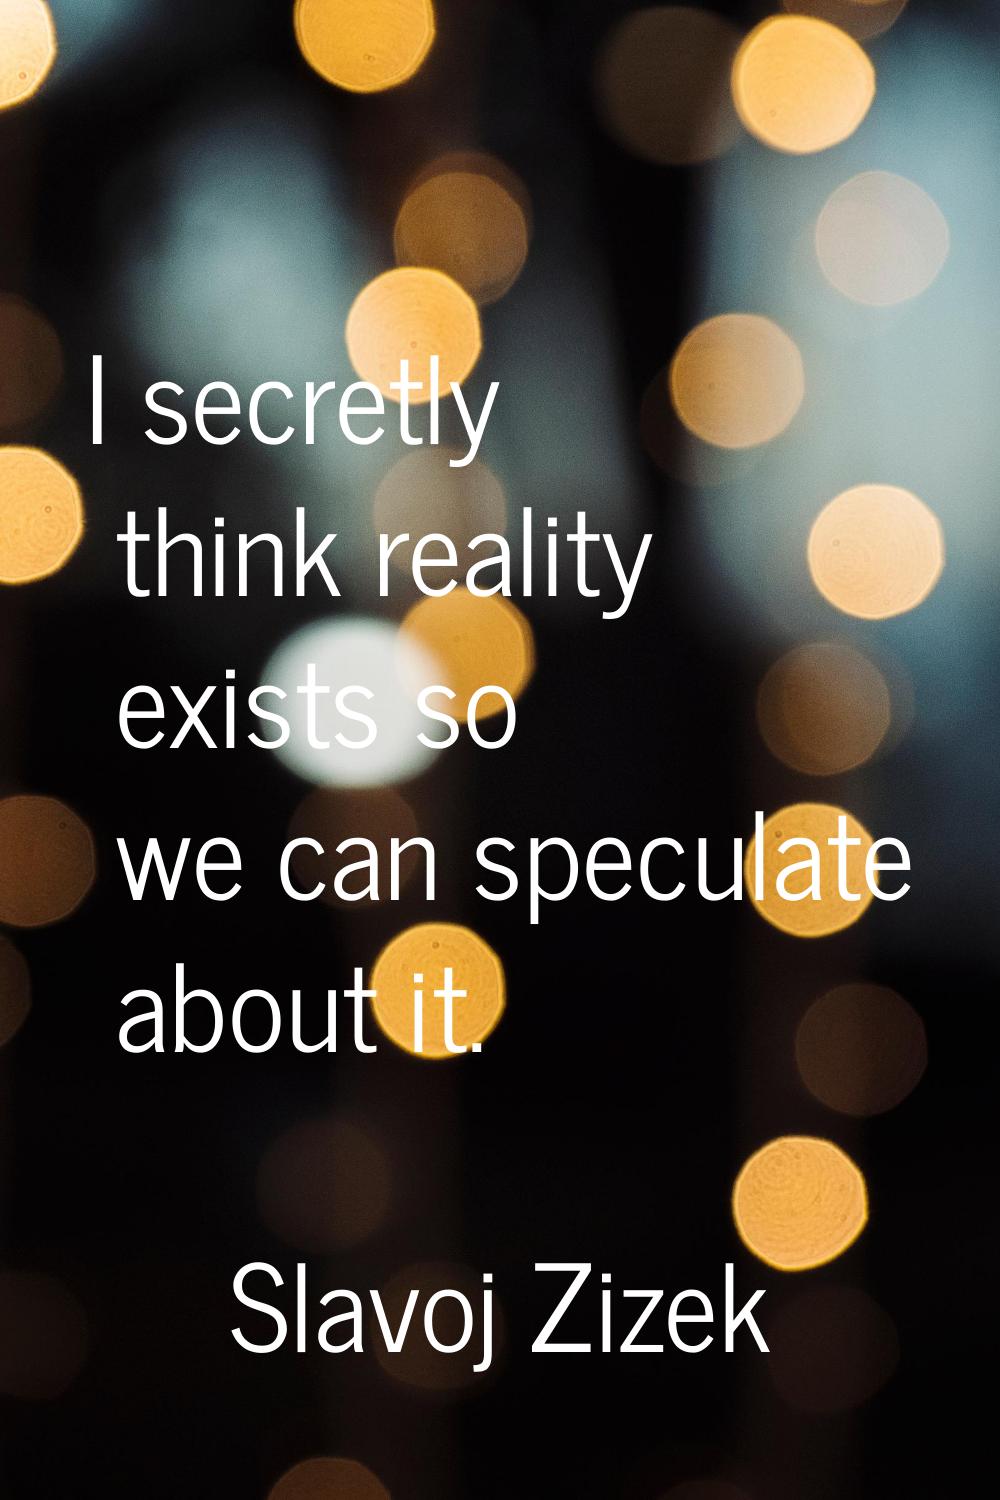 I secretly think reality exists so we can speculate about it.